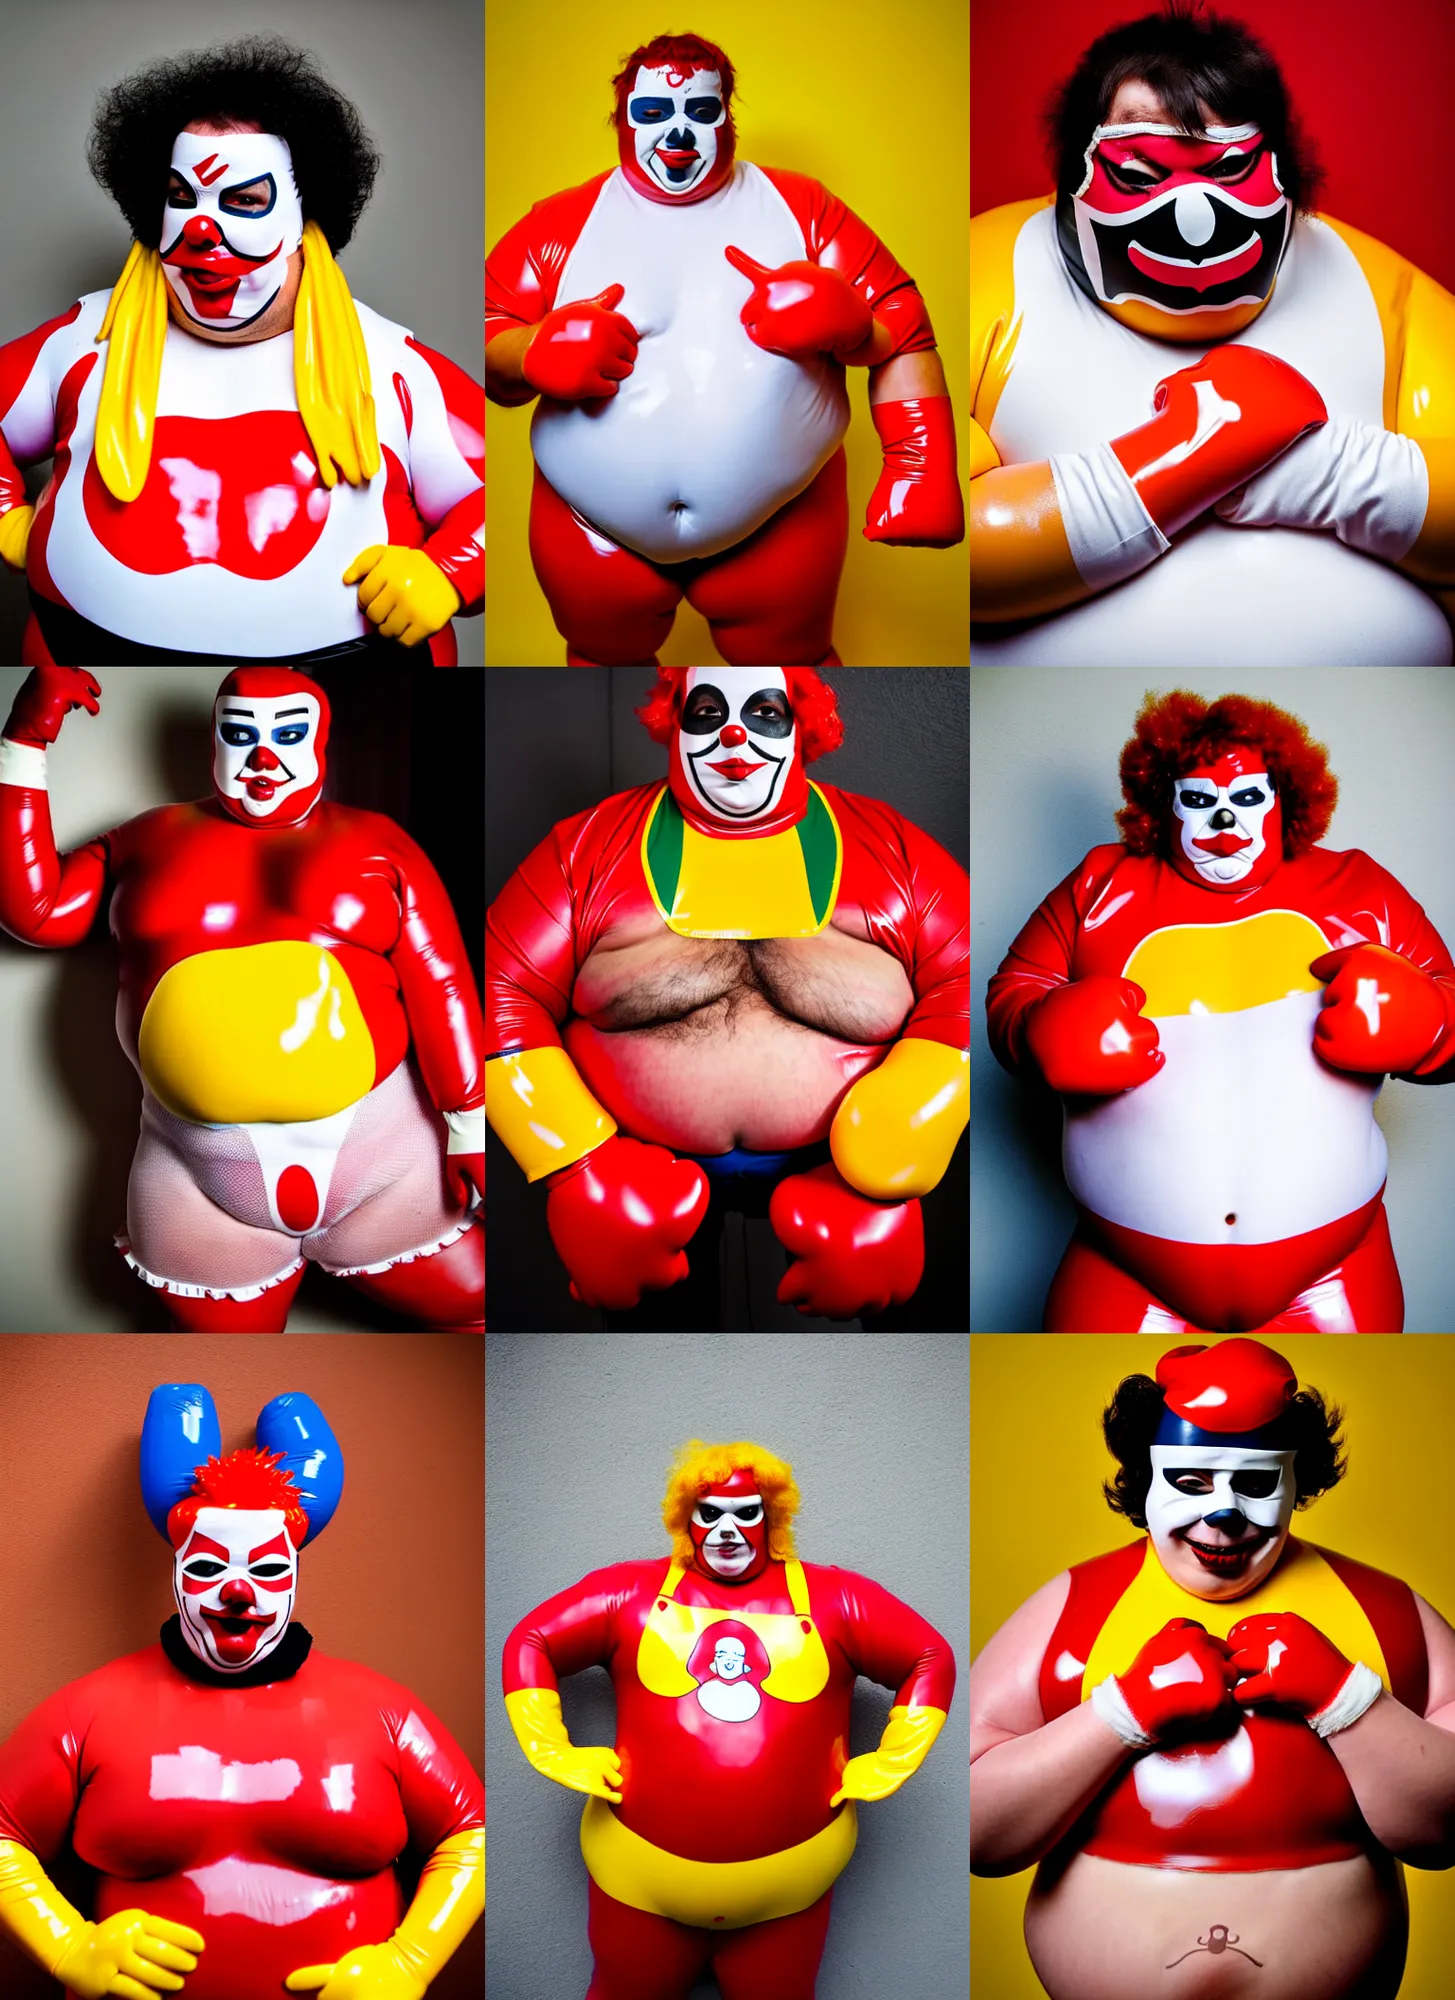 Prompt: portrait of a very chubby looking Lucha libre dressed in Ronald McDonald rubber latex costume with red and white color latex sleeves, yellow latex gloves, hamburger tattoo on bare hairy chest, red Ronald McDonald hair